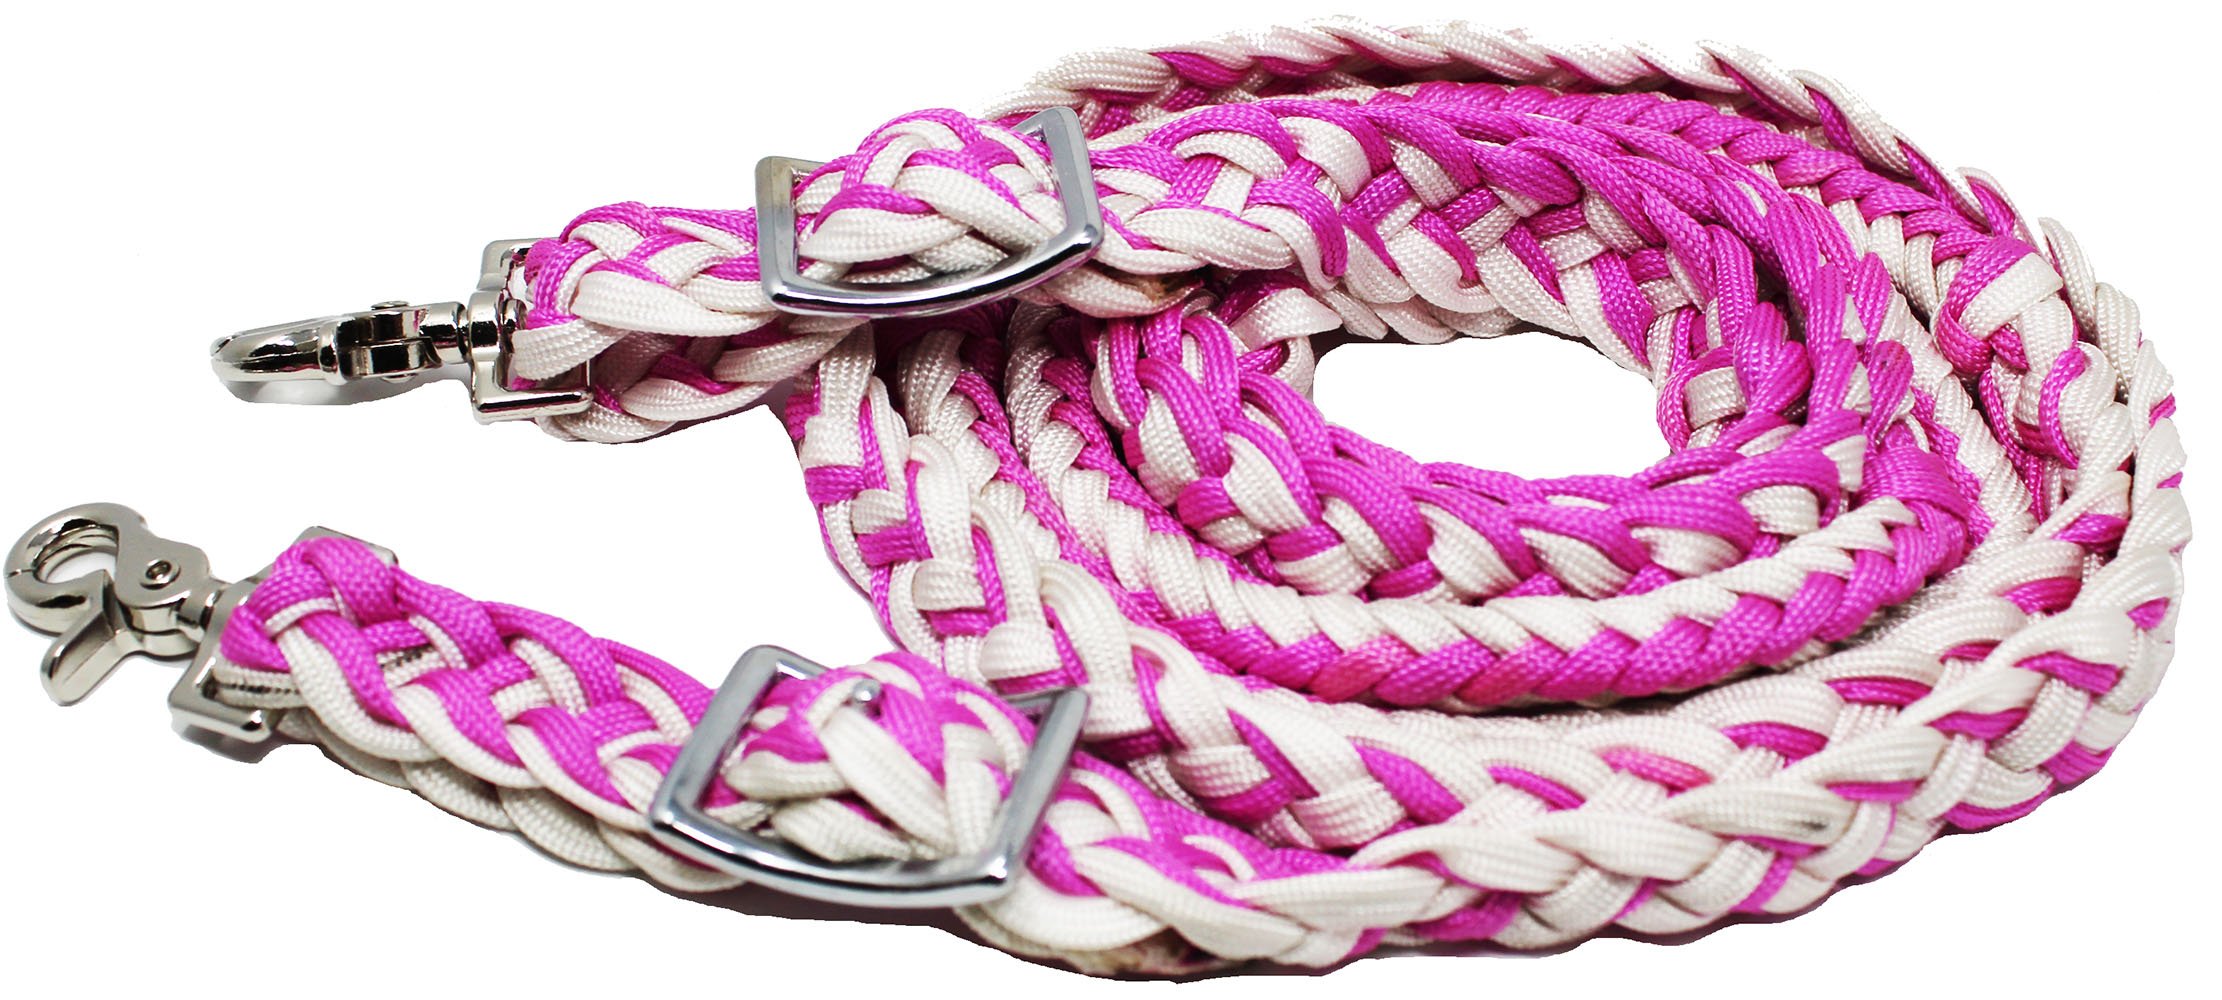 Horse Roping Knotted Tack Western Barrel Reins Nylon Braided Purple Pink 607486 